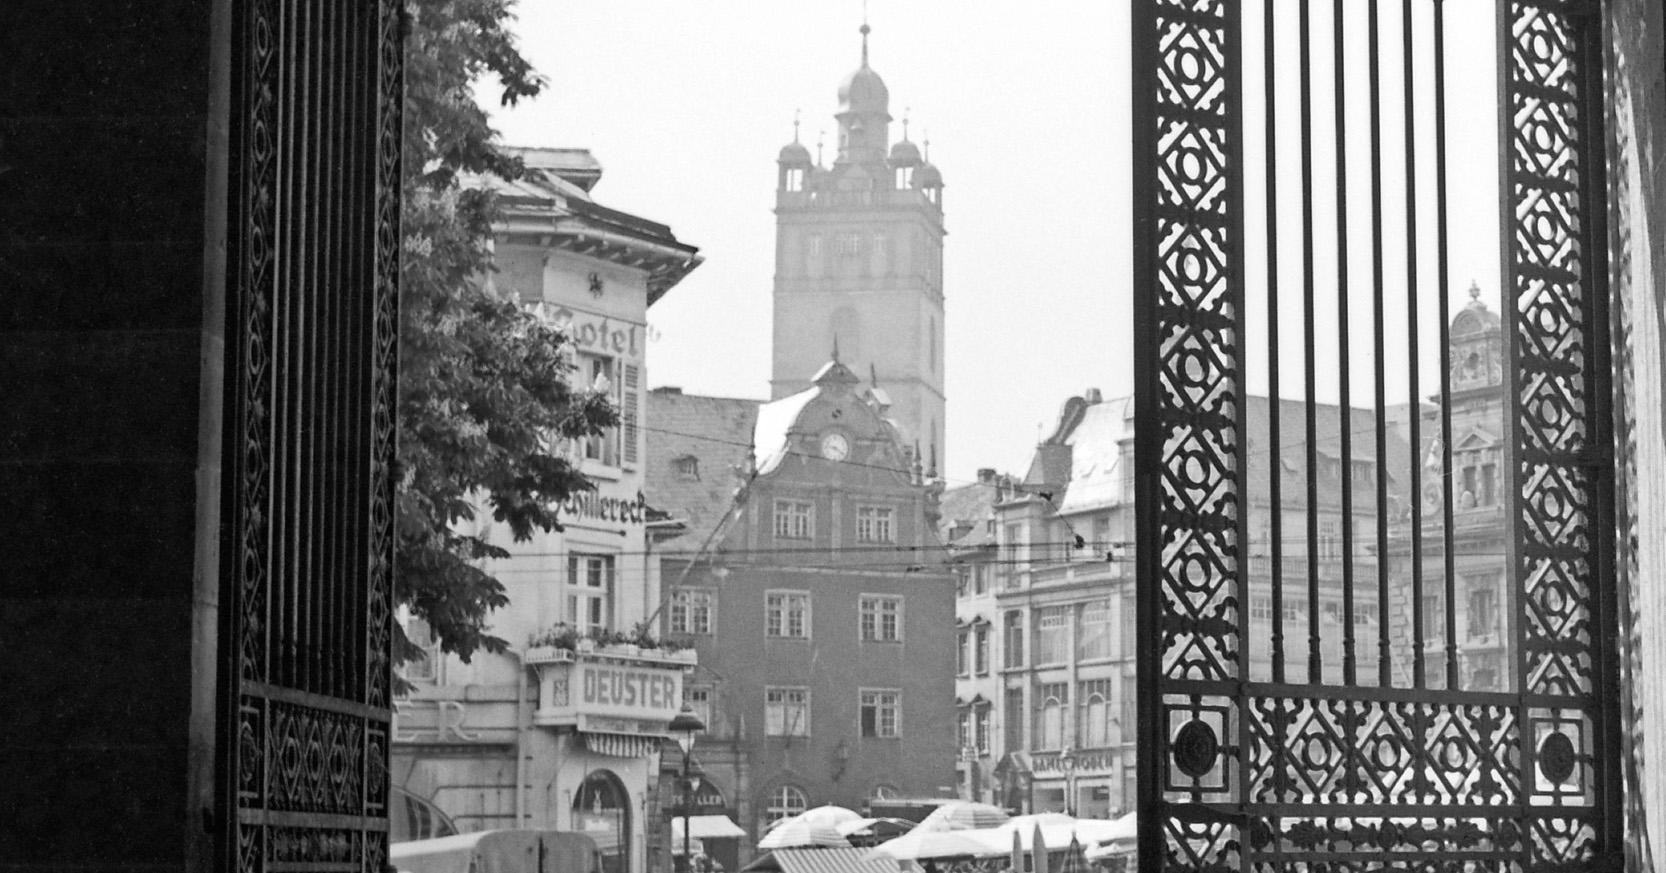 View gate Residence castle to main market Darmstadt, Germany 1938 Printed Later  - Photograph by Karl Heinrich Lämmel